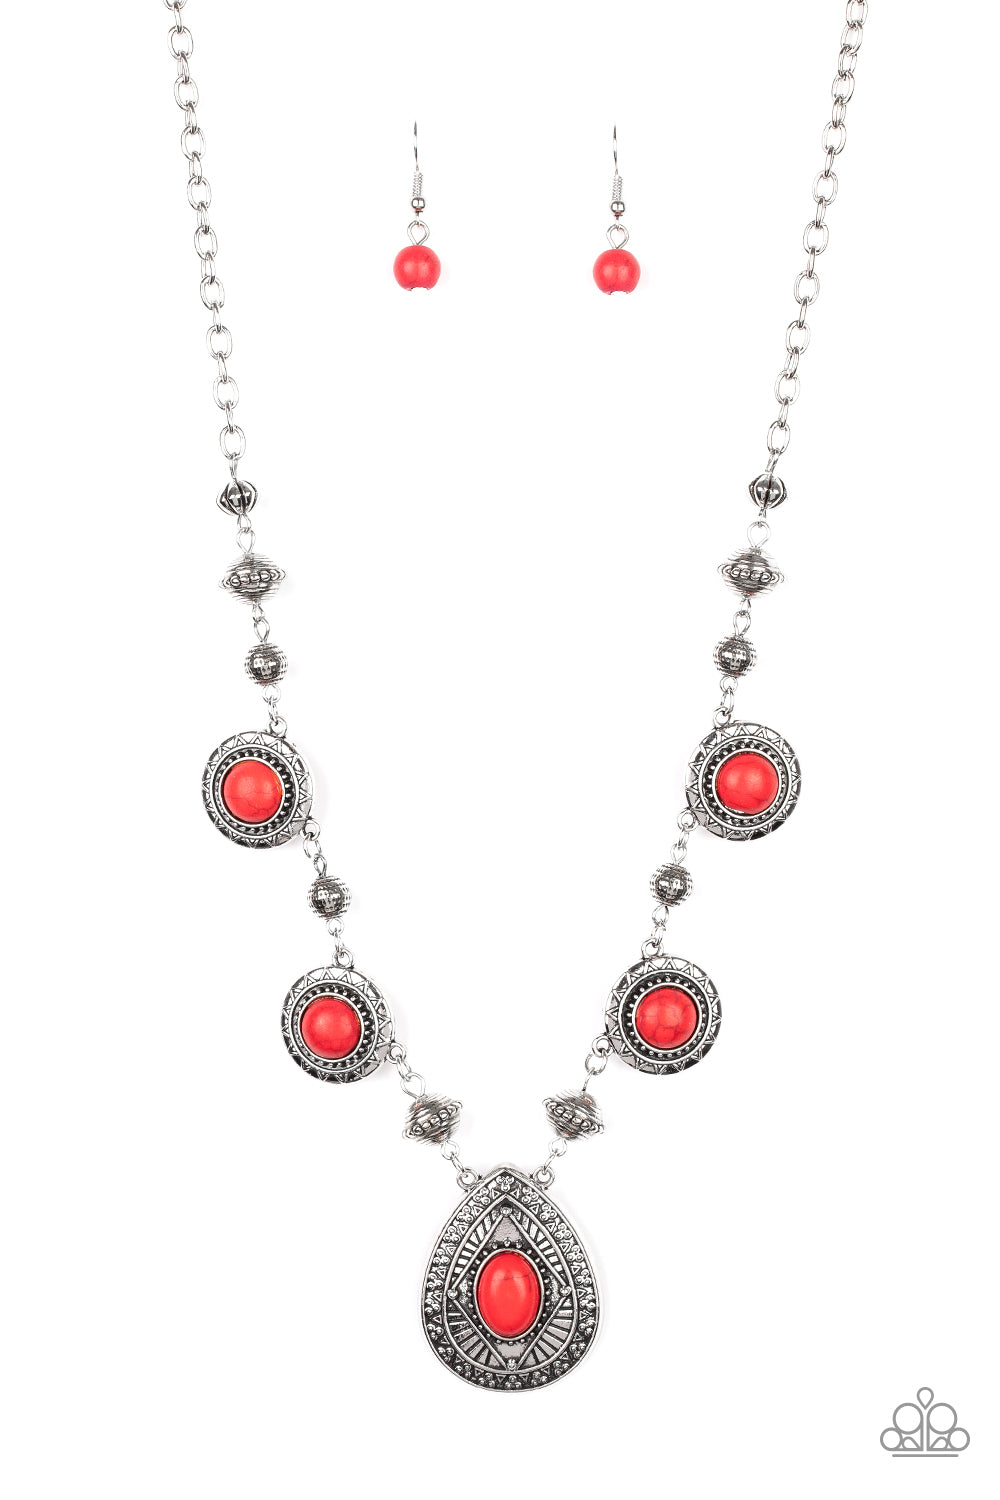 Mayan Magic Red Necklace